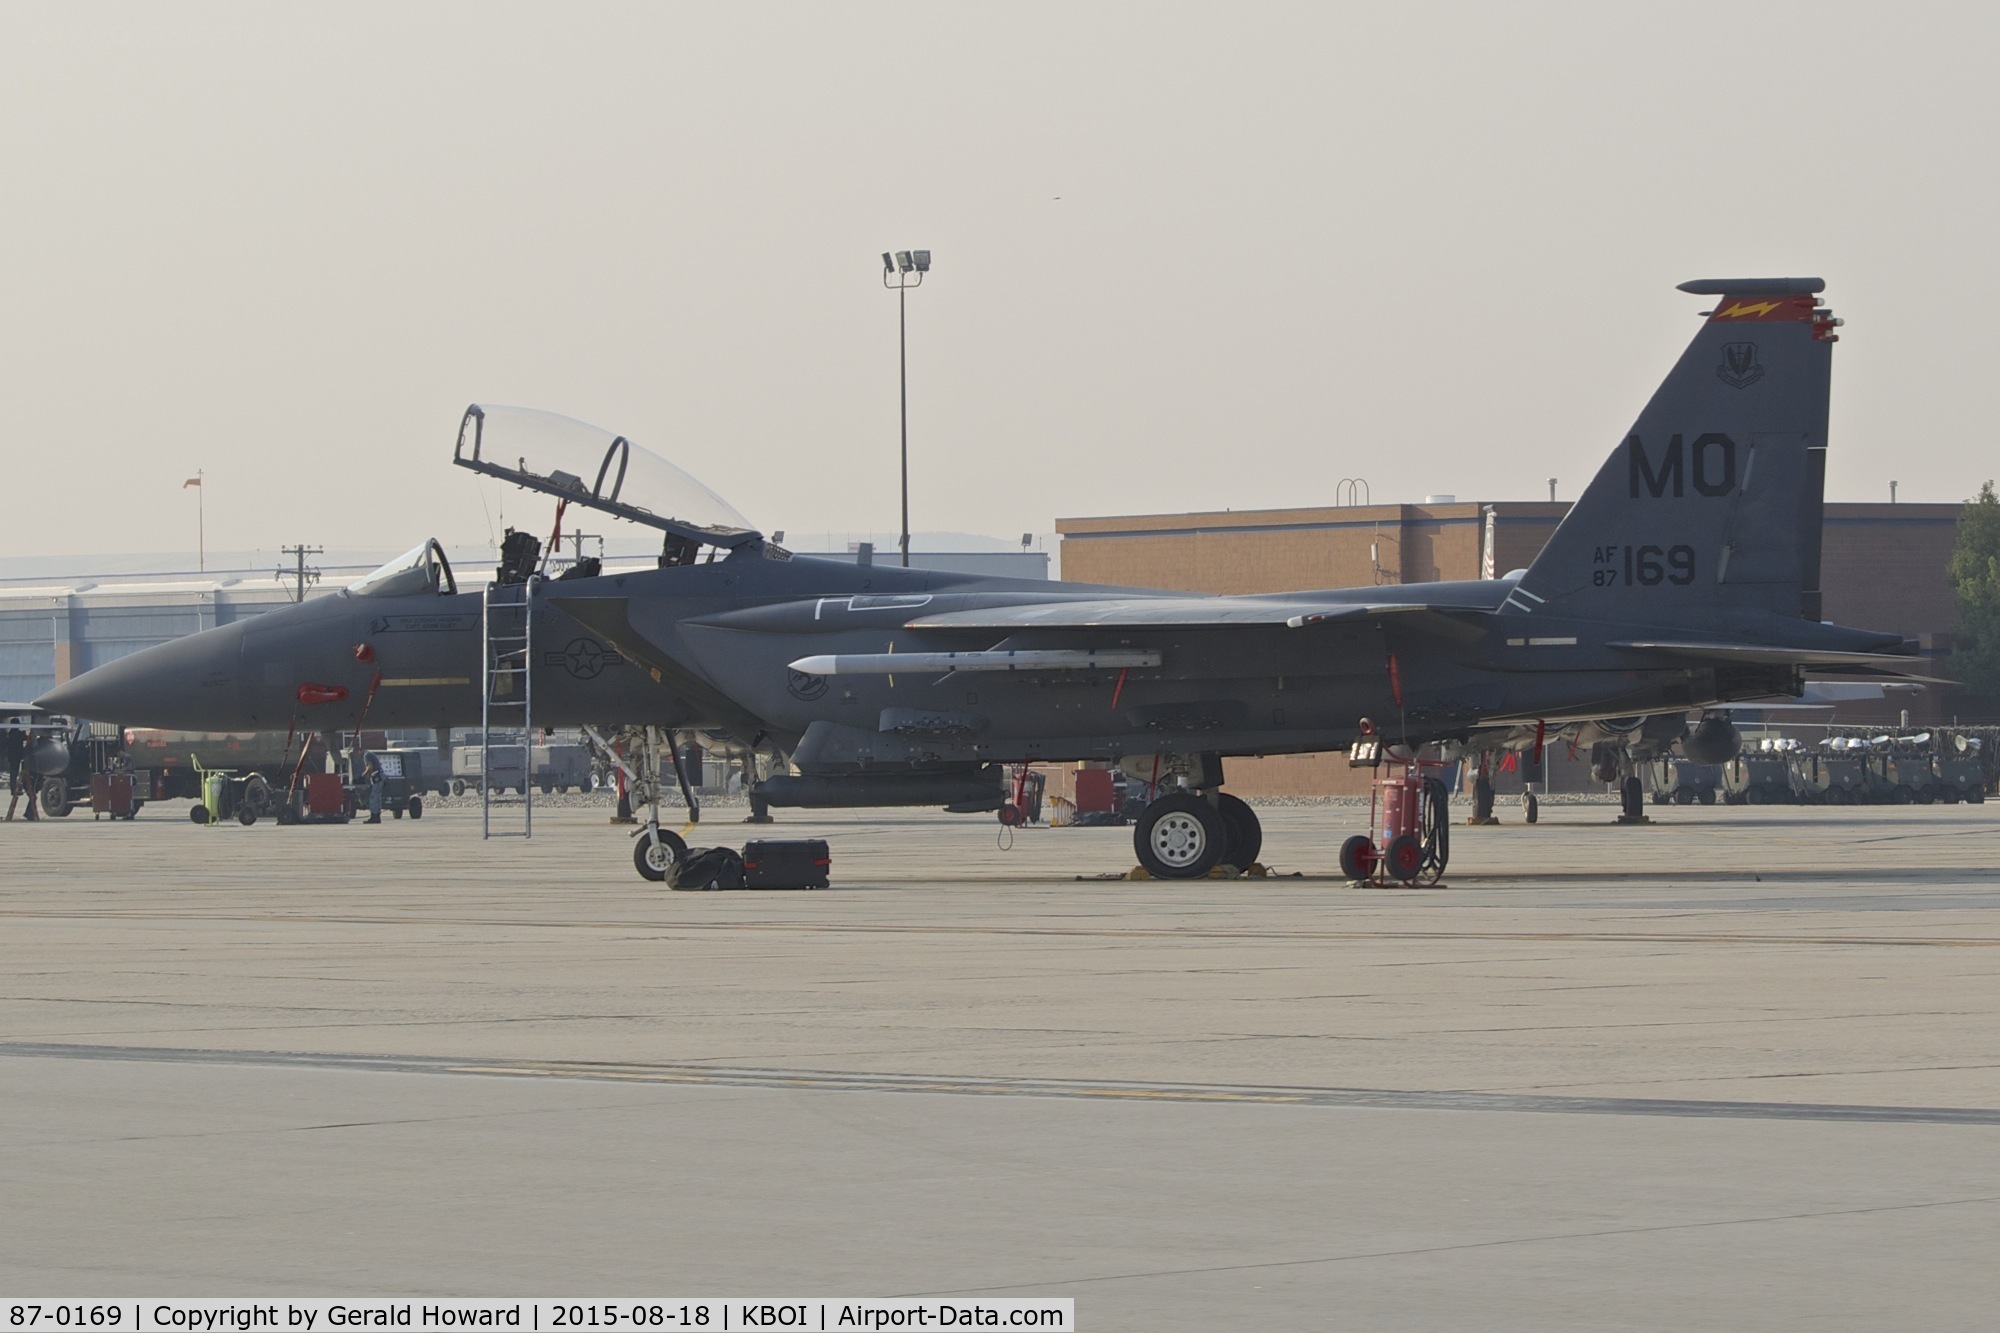 87-0169, 1987 McDonnell Douglas F-15E Strike Eagle C/N 1034/E009, 389TH Fighter Sq Thunderbolts, 366th Fighter Wing, Mountain Home AFB, Idaho.